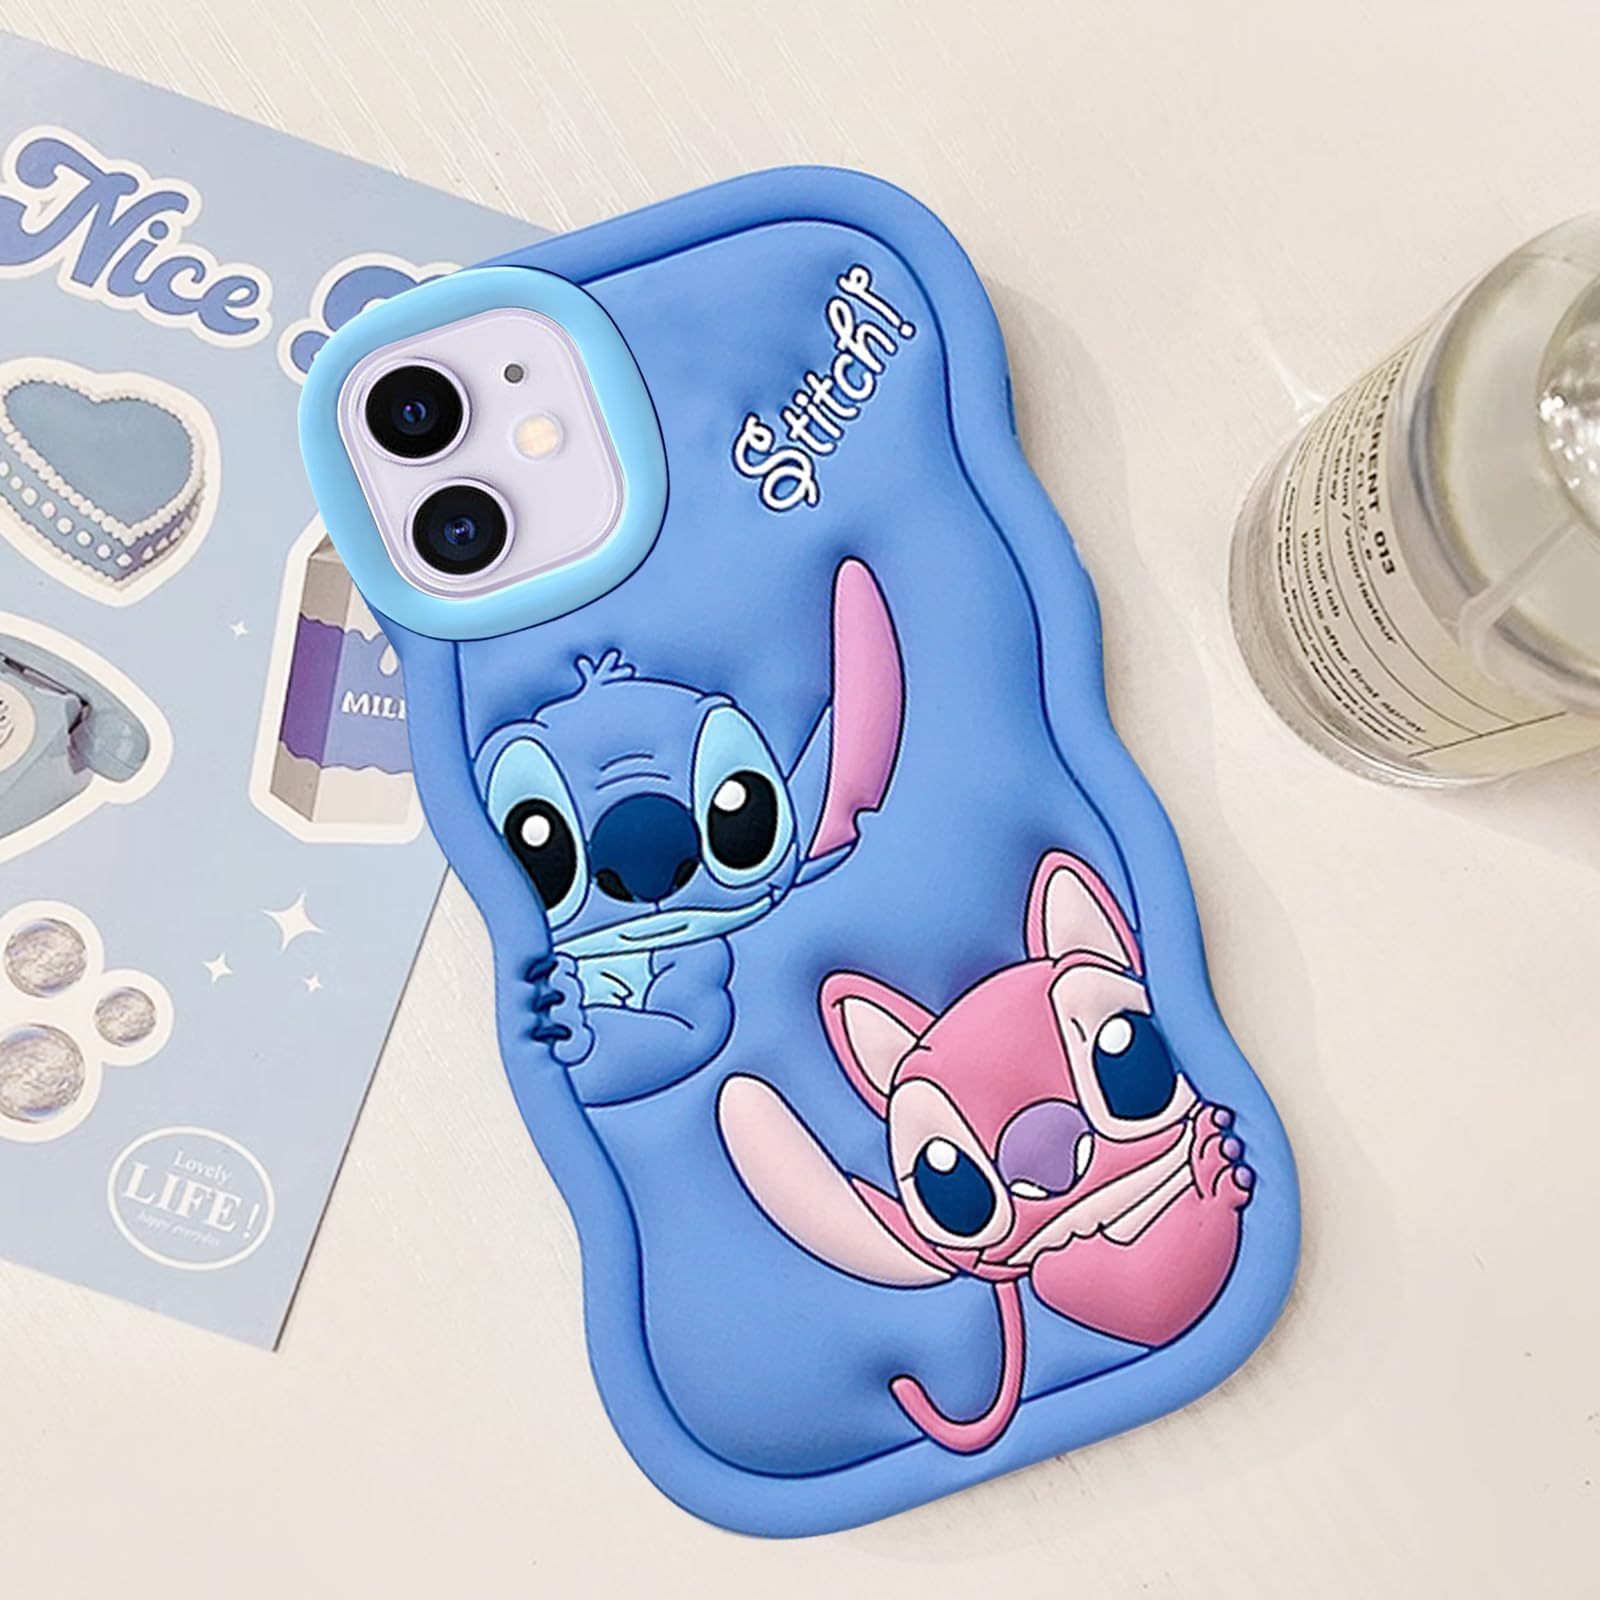 Case for iPhone X/iPhone Xs (5.8 inch), TPU Kawaii Shockproof Protective  Cover Case for Women Girls, Cute Phone Case for iPhone X/iPhone Xs, Baby  Blue